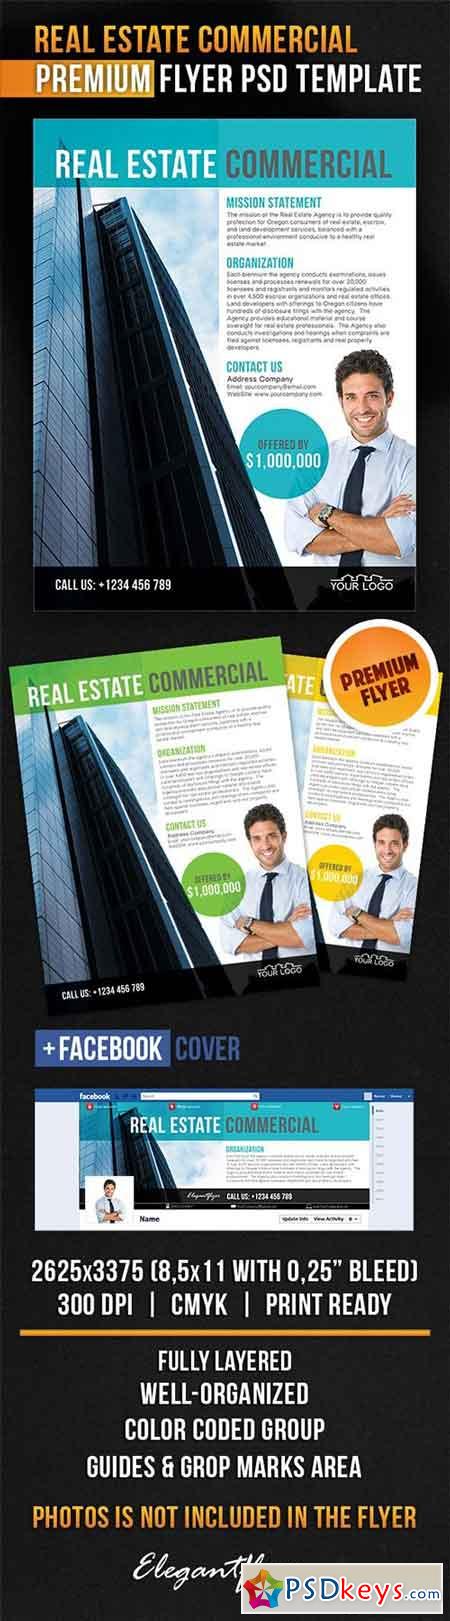 Real Estate Commercial Flyer PSD Template + Facebook Cover